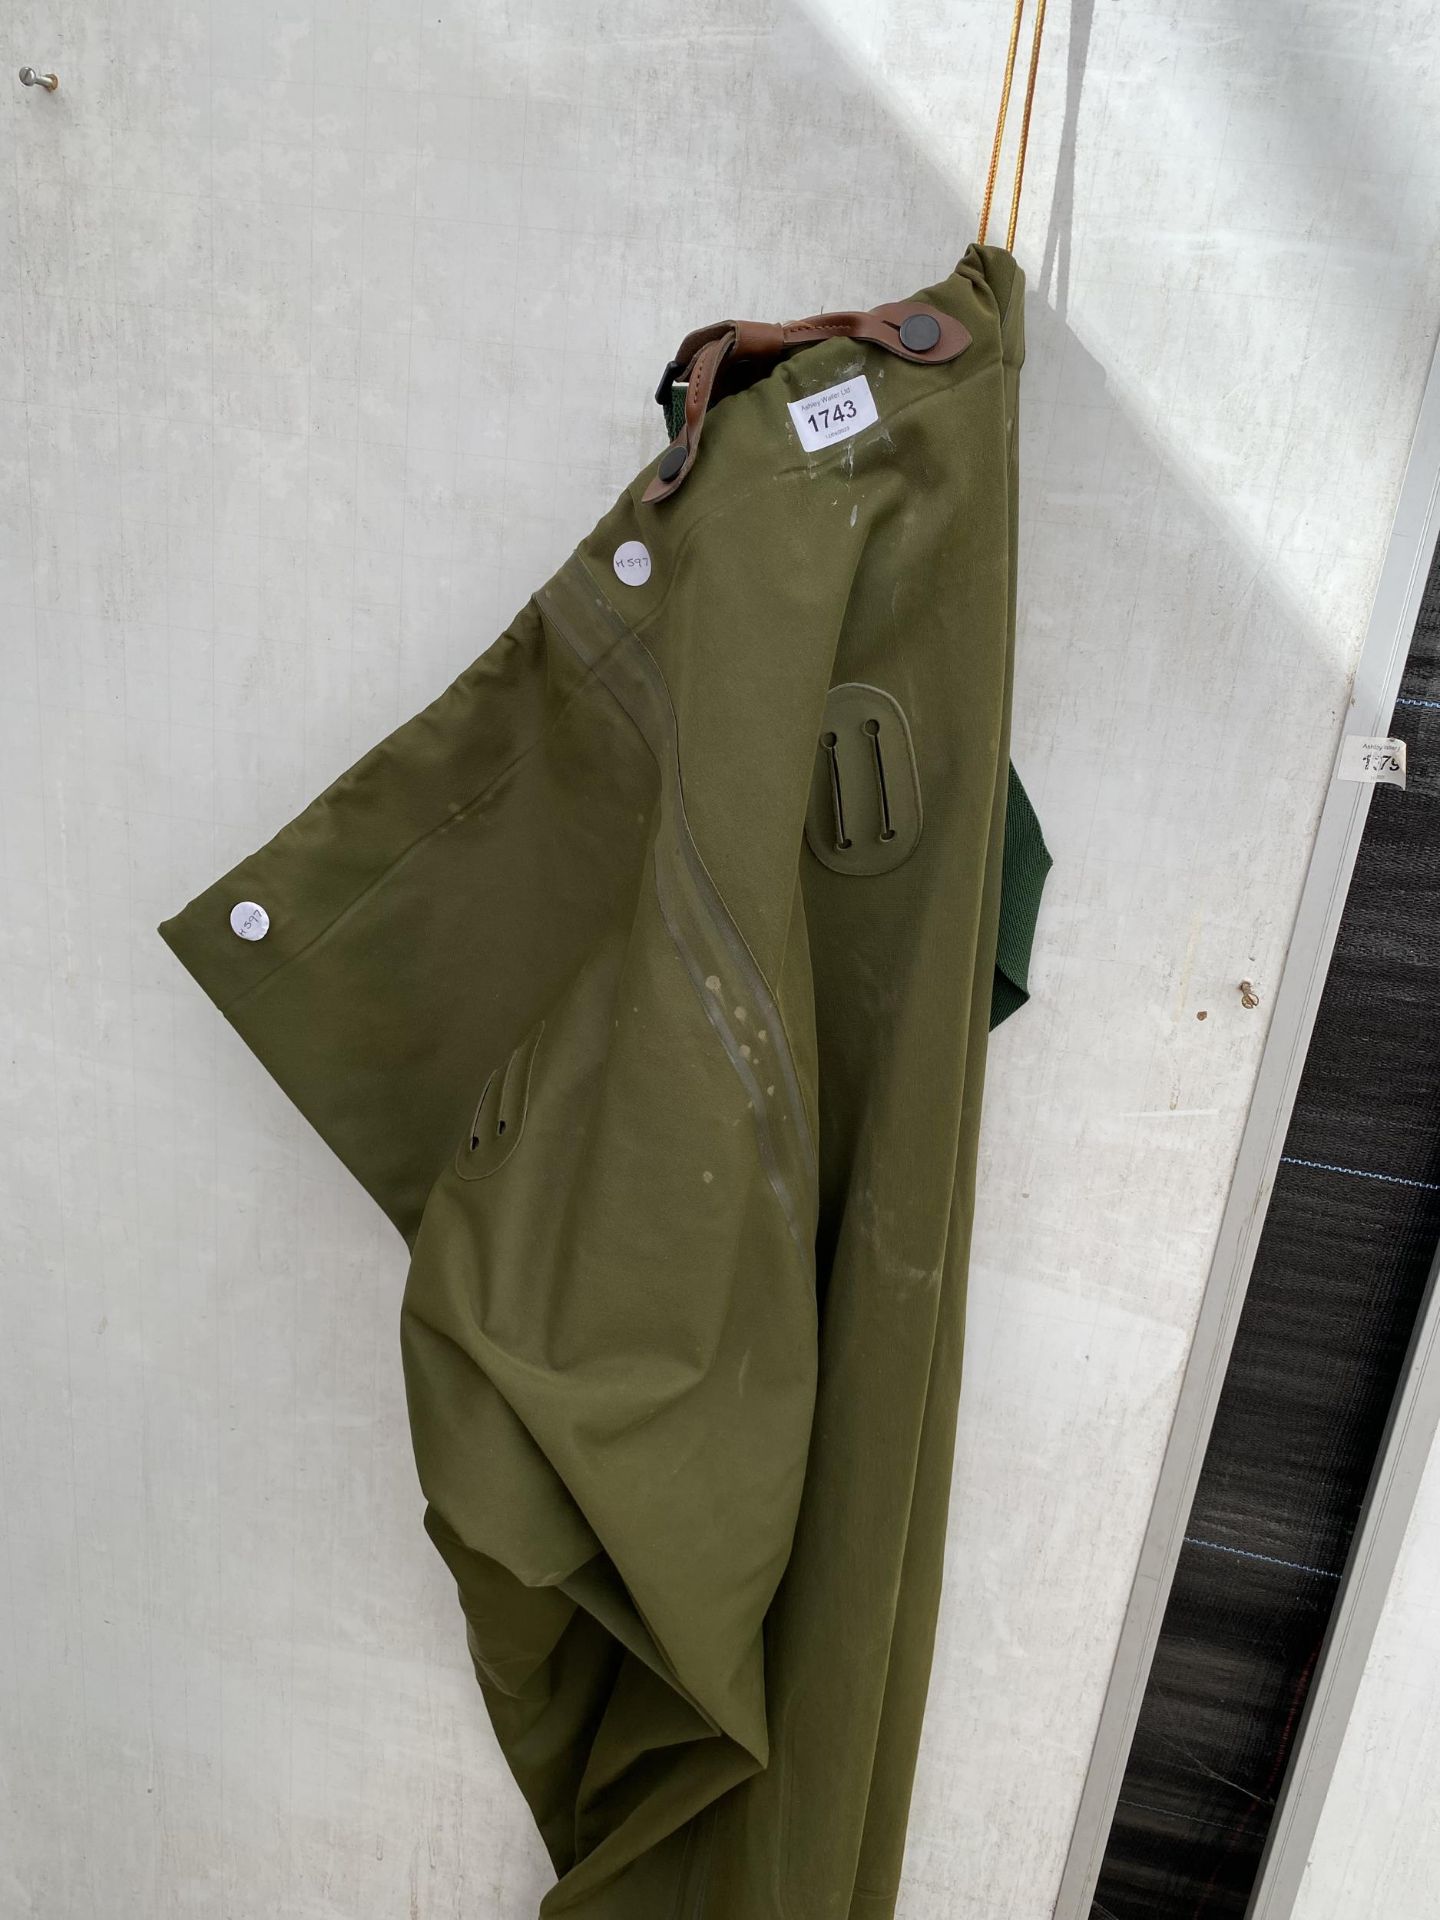 A PAIR OF SIZE 10 ORVIS CHEST FISHING WADERS WITH FELT SOLES - Image 3 of 4